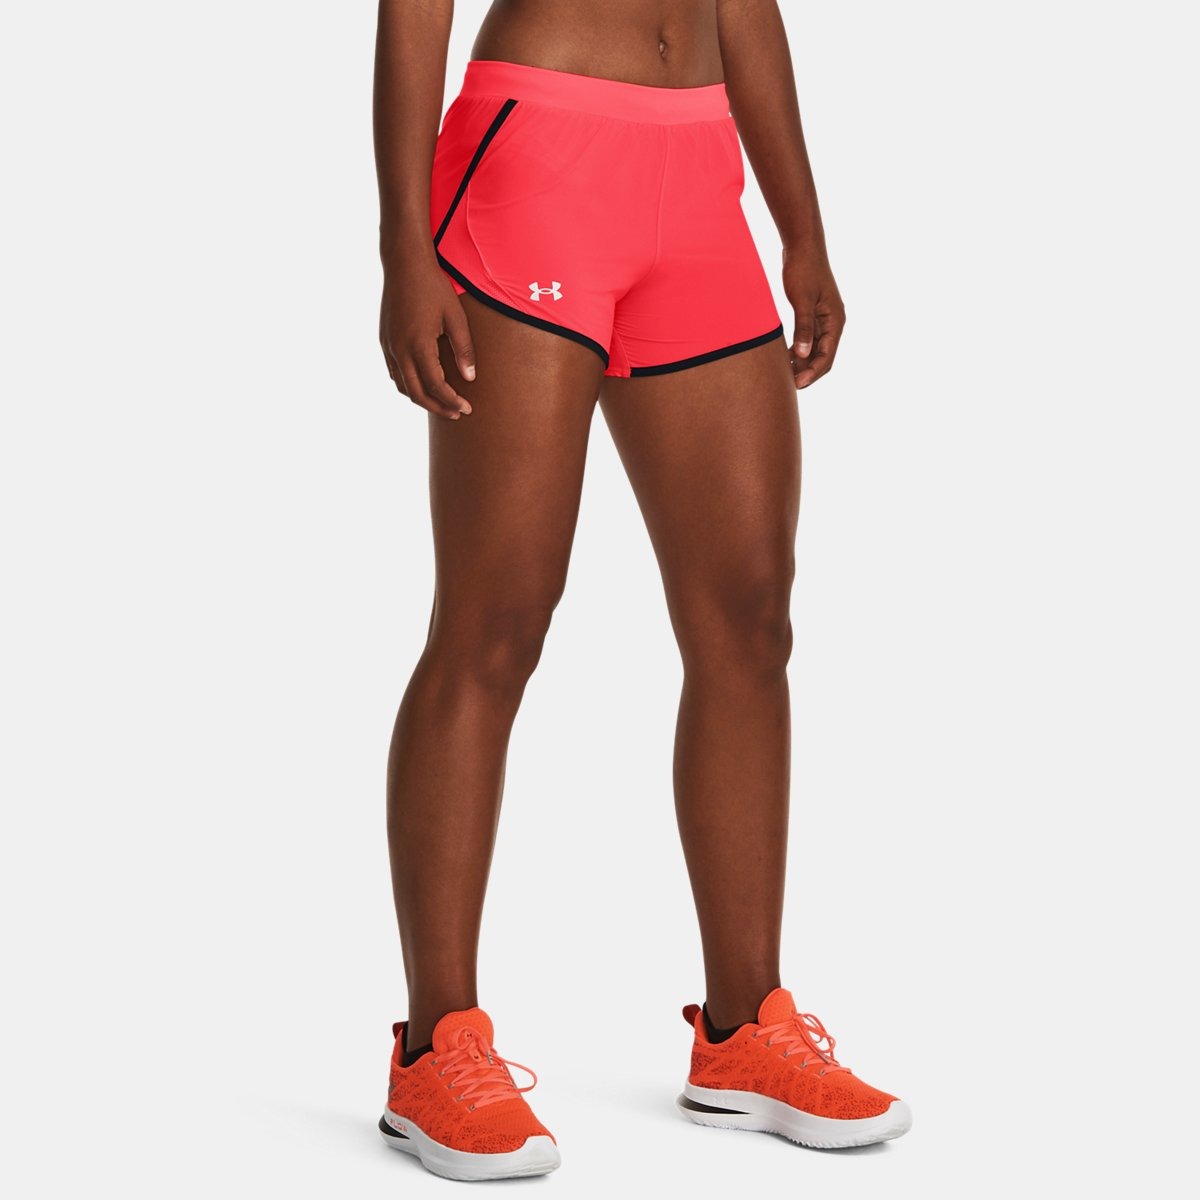 Under Armour - Red Lady Shorts GOOFASH